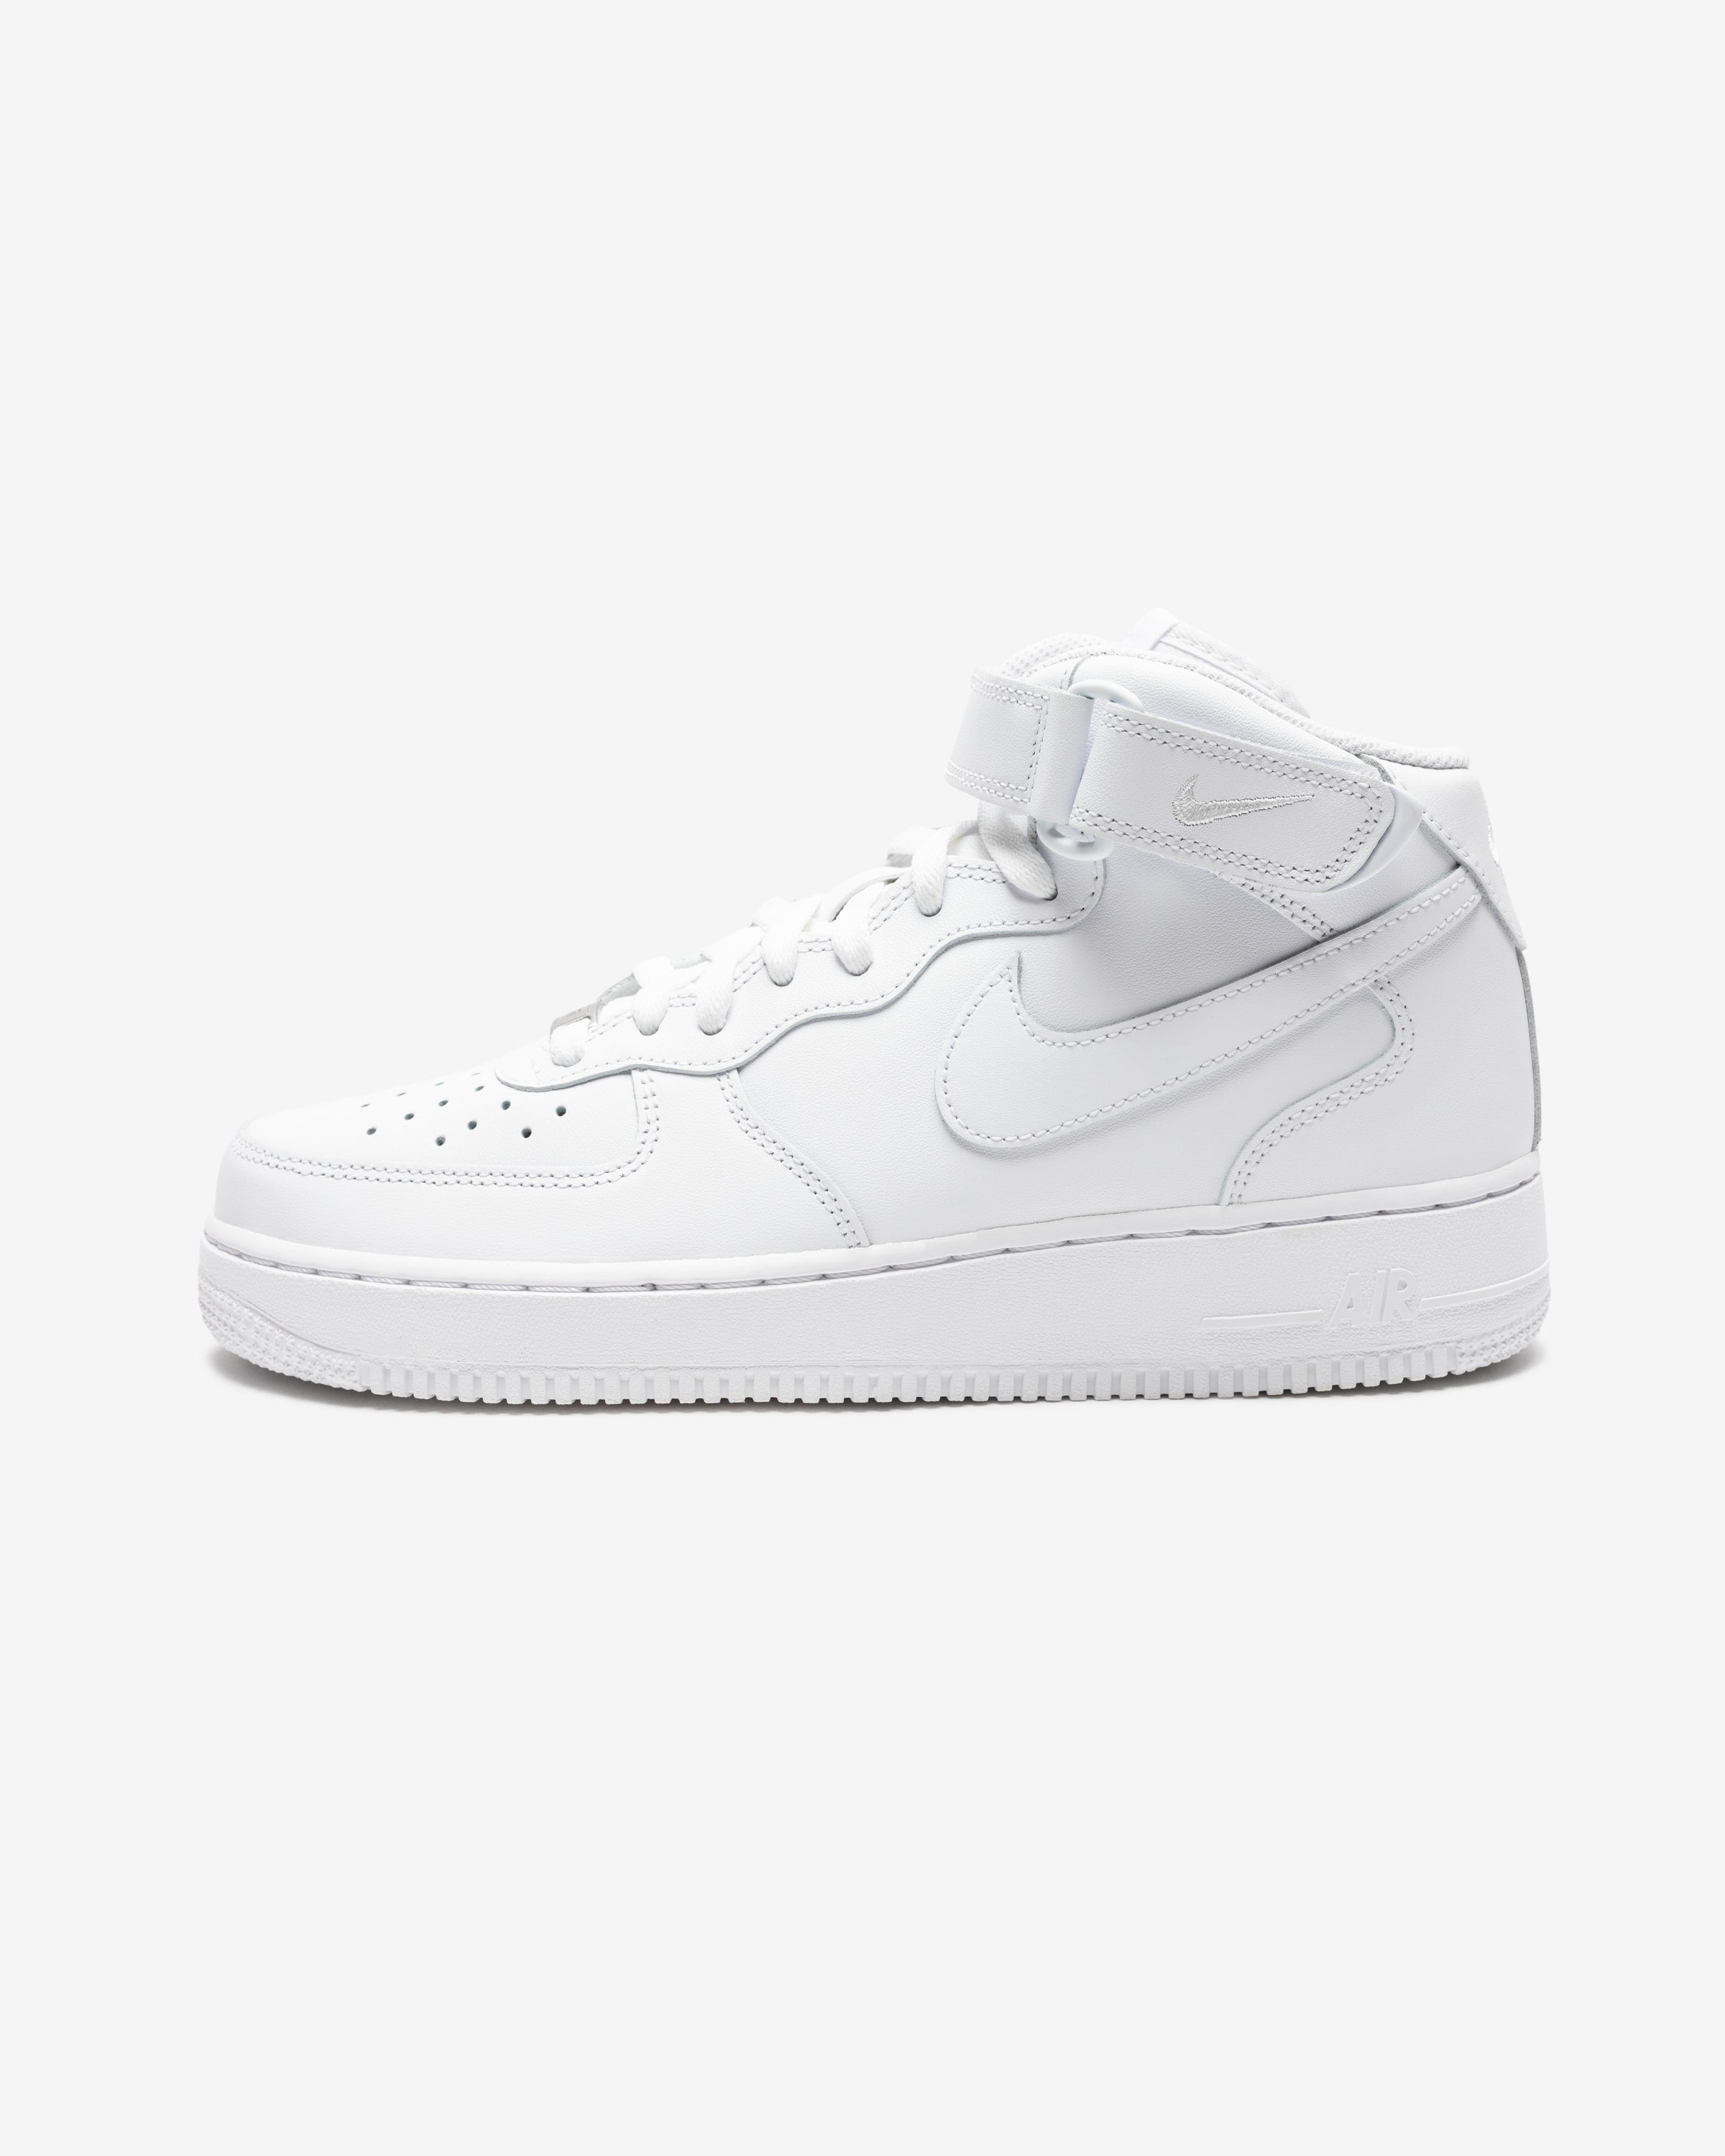 NIKE AIR FORCE 1 '07 - BLACK/ WHITE – Undefeated